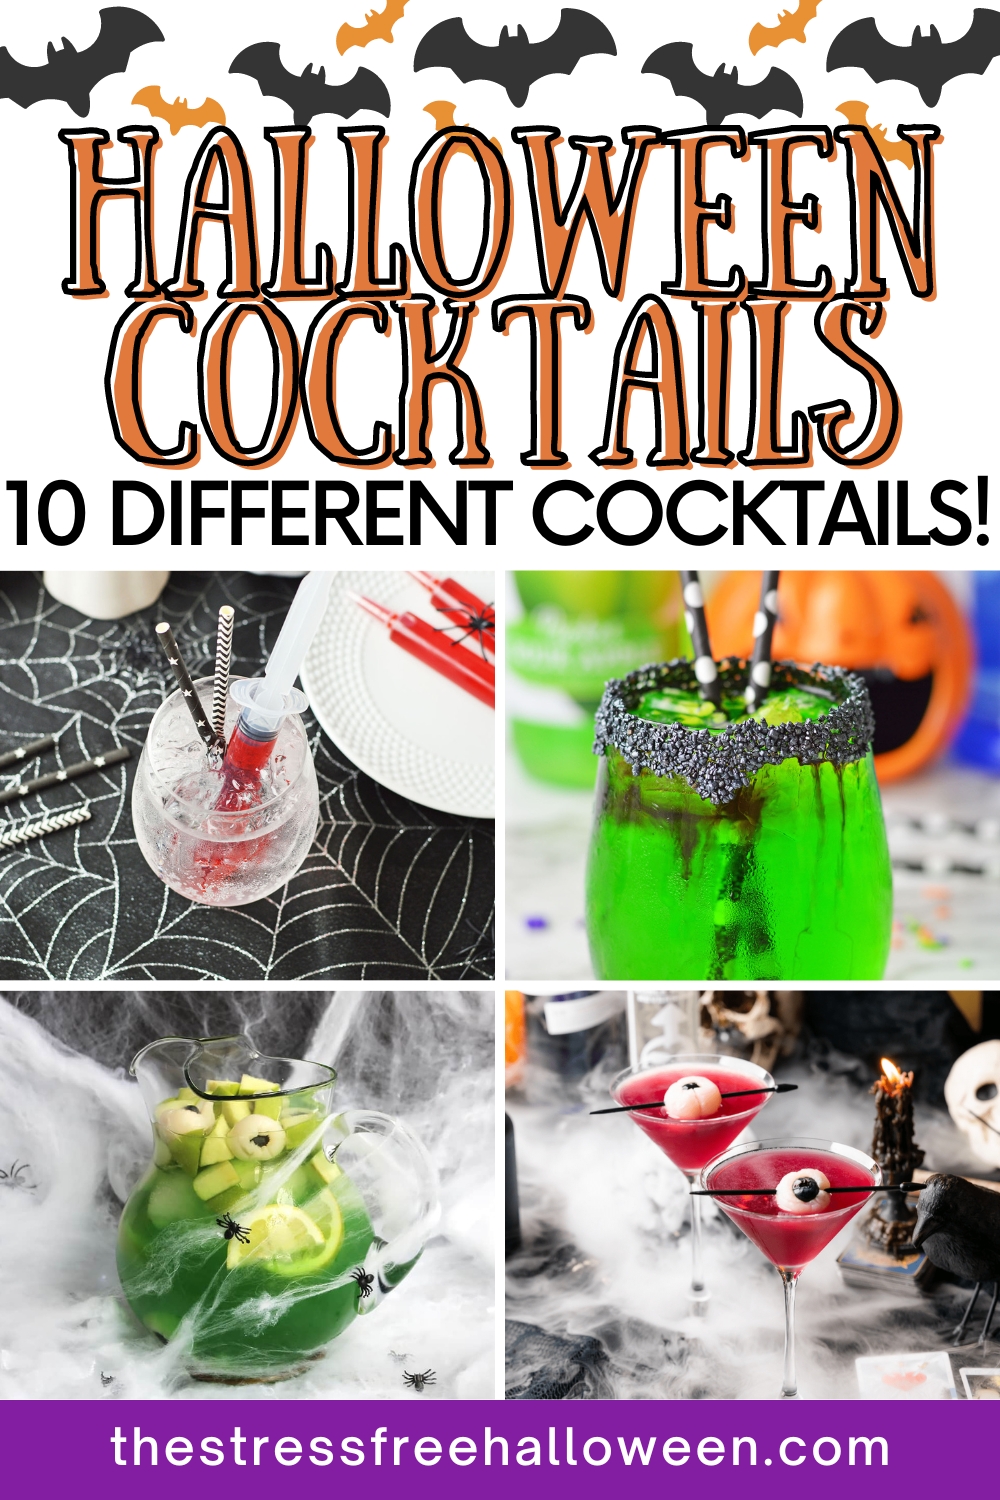 collage with four different spooky cocktails with text Halloween cocktails 10 different cocktails.